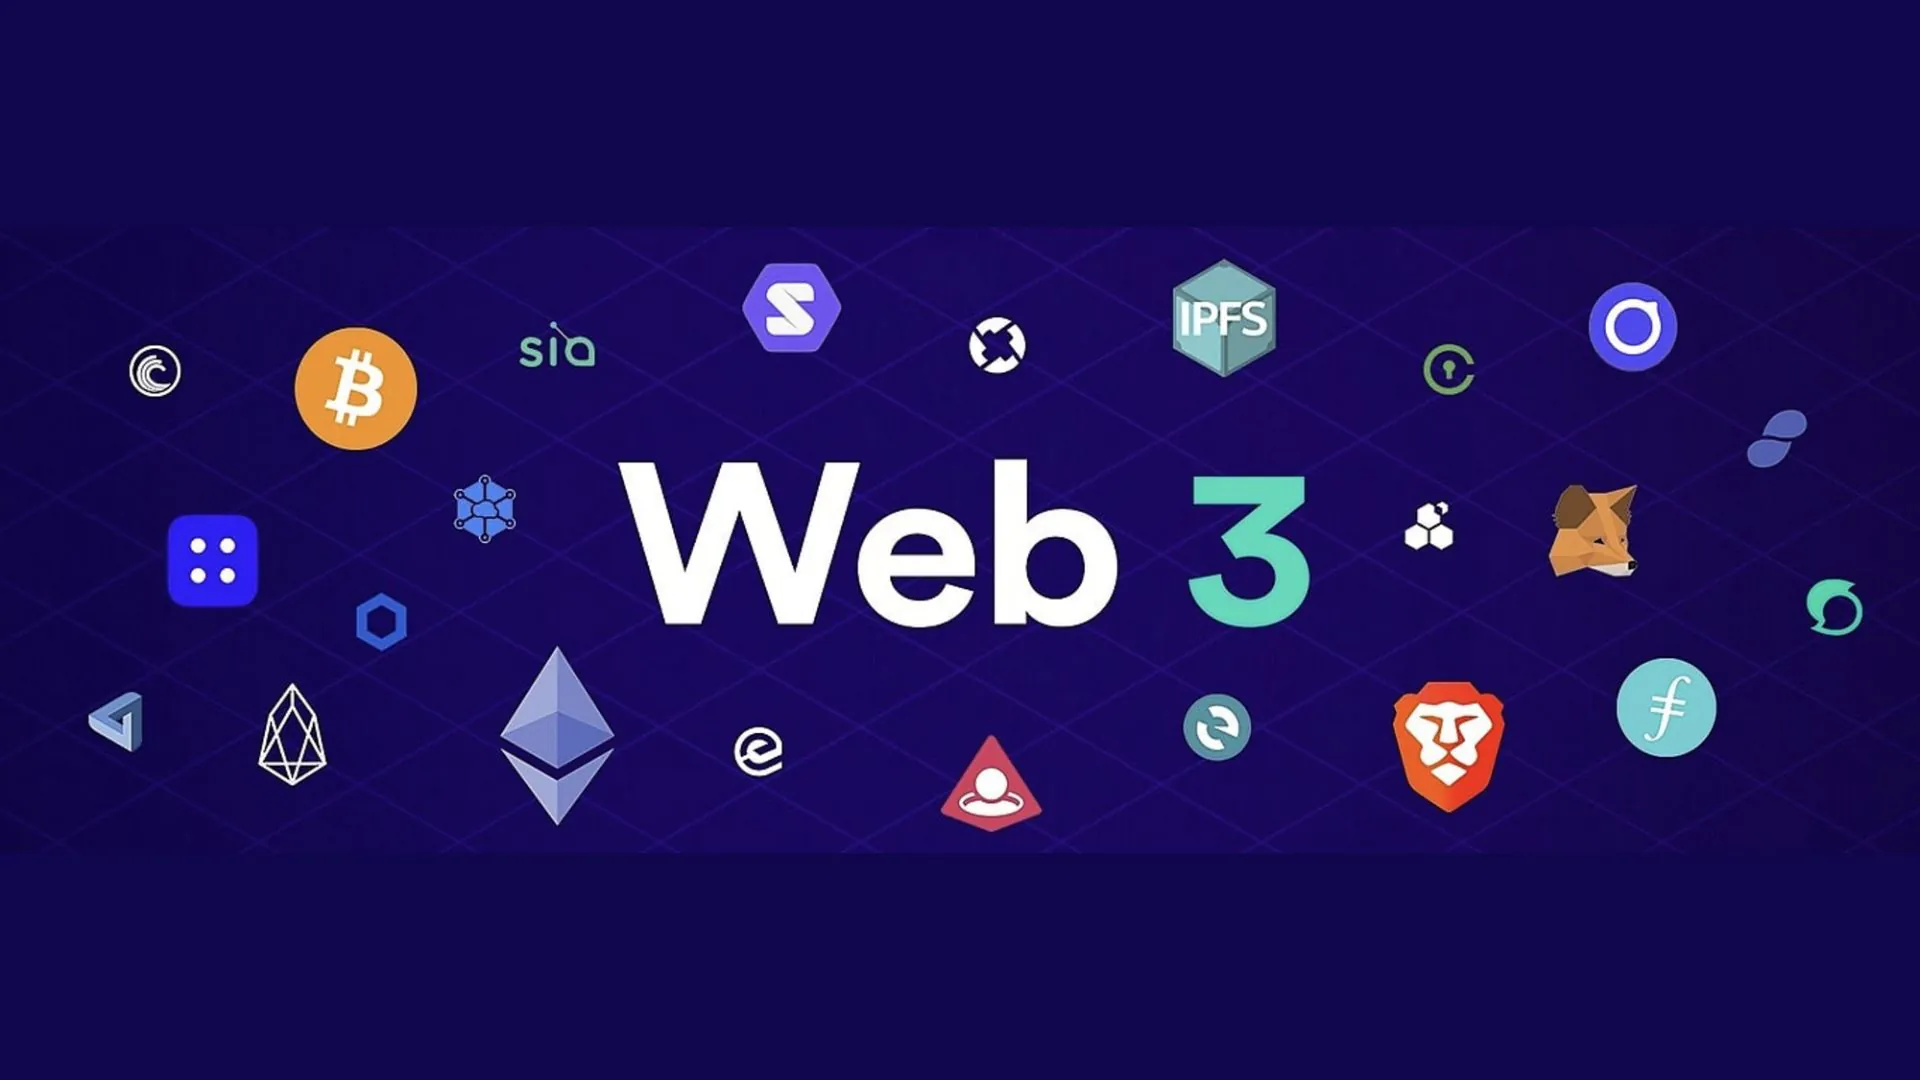 4 Potential Coins Of Web3 To Consider